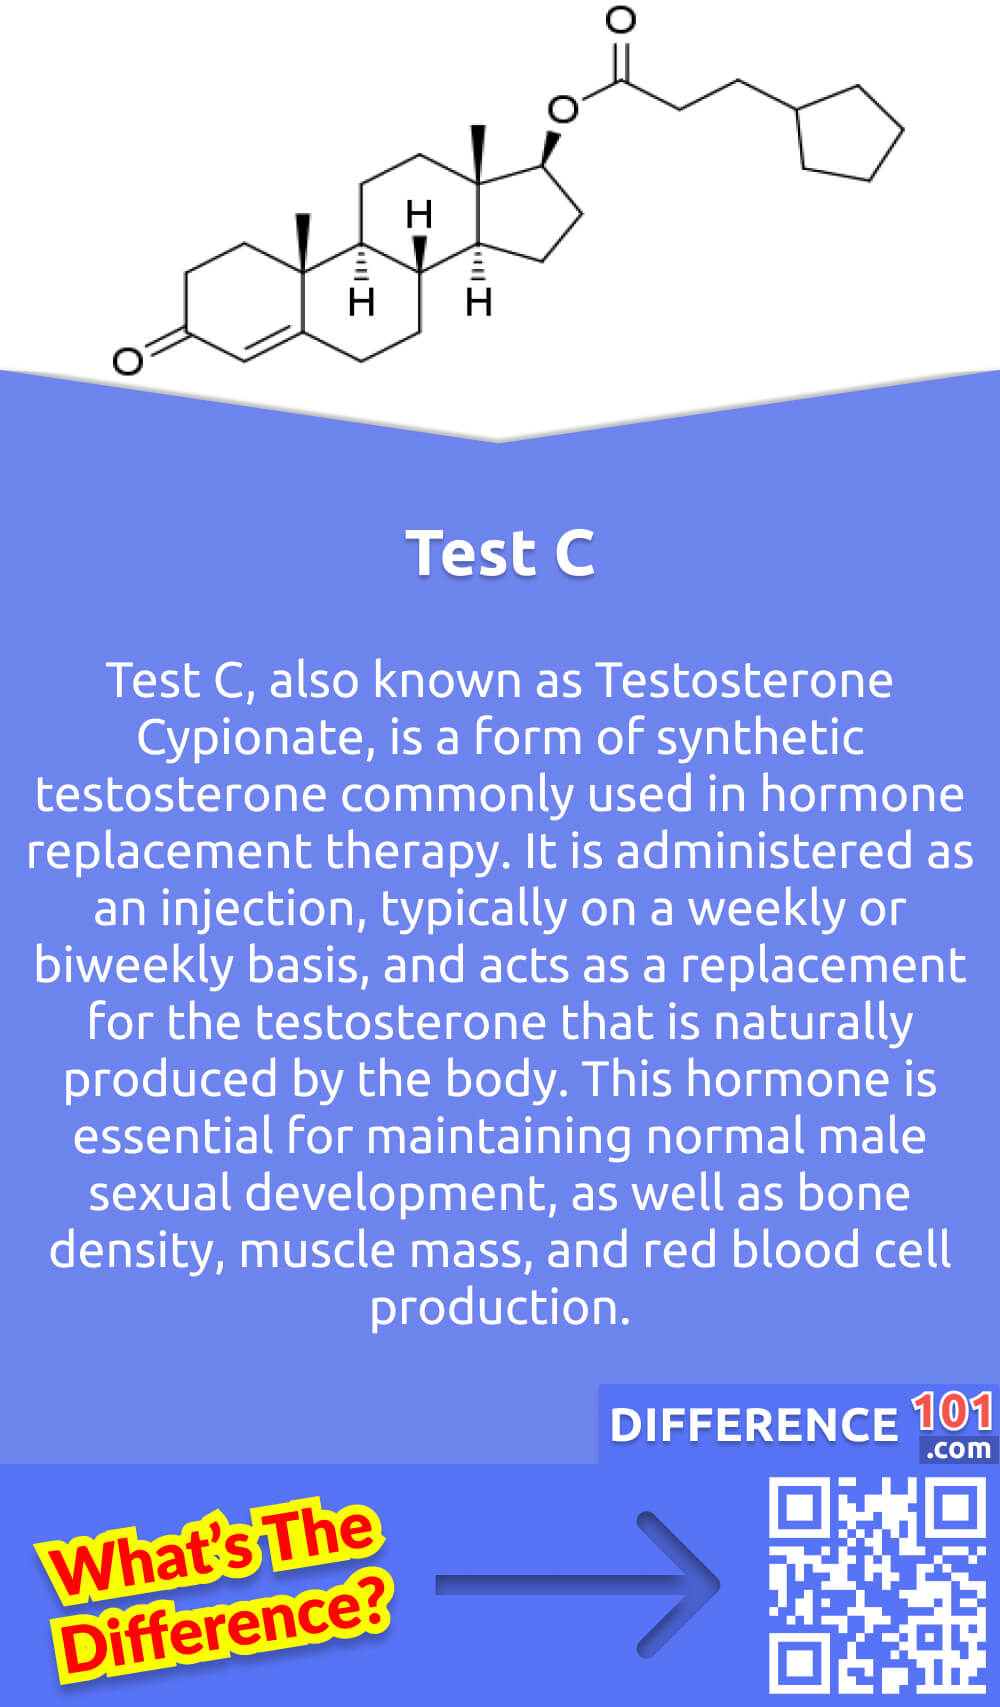 What Is Test C? Test C, also known as Testosterone Cypionate, is a form of synthetic testosterone commonly used in hormone replacement therapy. It is administered as an injection, typically on a weekly or biweekly basis, and acts as a replacement for the testosterone that is naturally produced by the body. This hormone is essential for maintaining normal male sexual development, as well as bone density, muscle mass, and red blood cell production. Test C is particularly useful for individuals experiencing hypogonadism, a condition where the body is unable to produce sufficient amounts of testosterone, as it can help alleviate the associated symptoms, such as reduced libido, fatigue, and cognitive impairment. However, it should only be used under the supervision of a qualified healthcare professional.